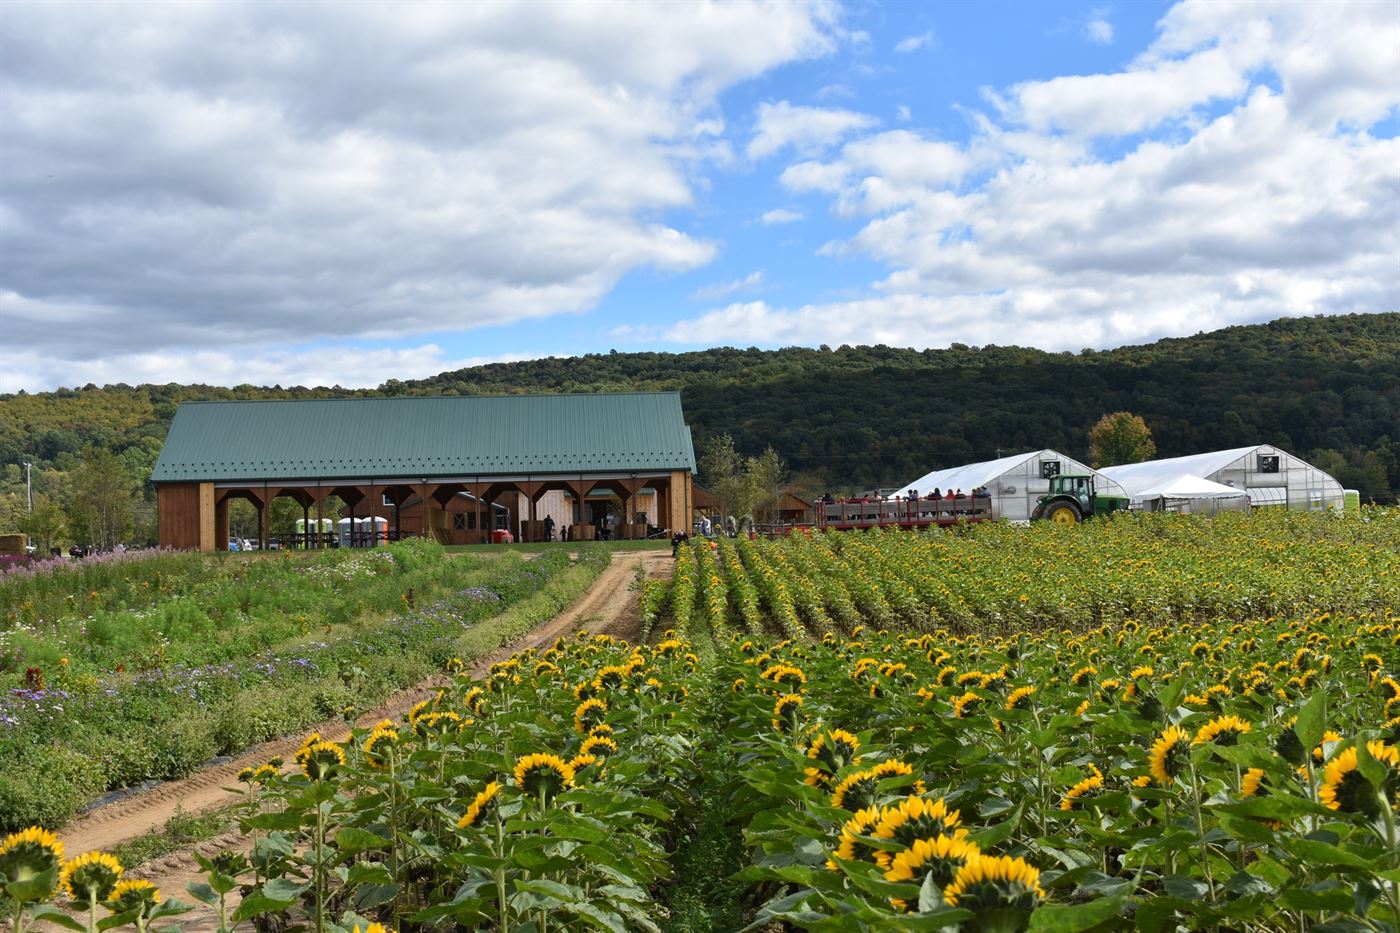 The sunflower field behind Tranquility Farms looking at the pavilion